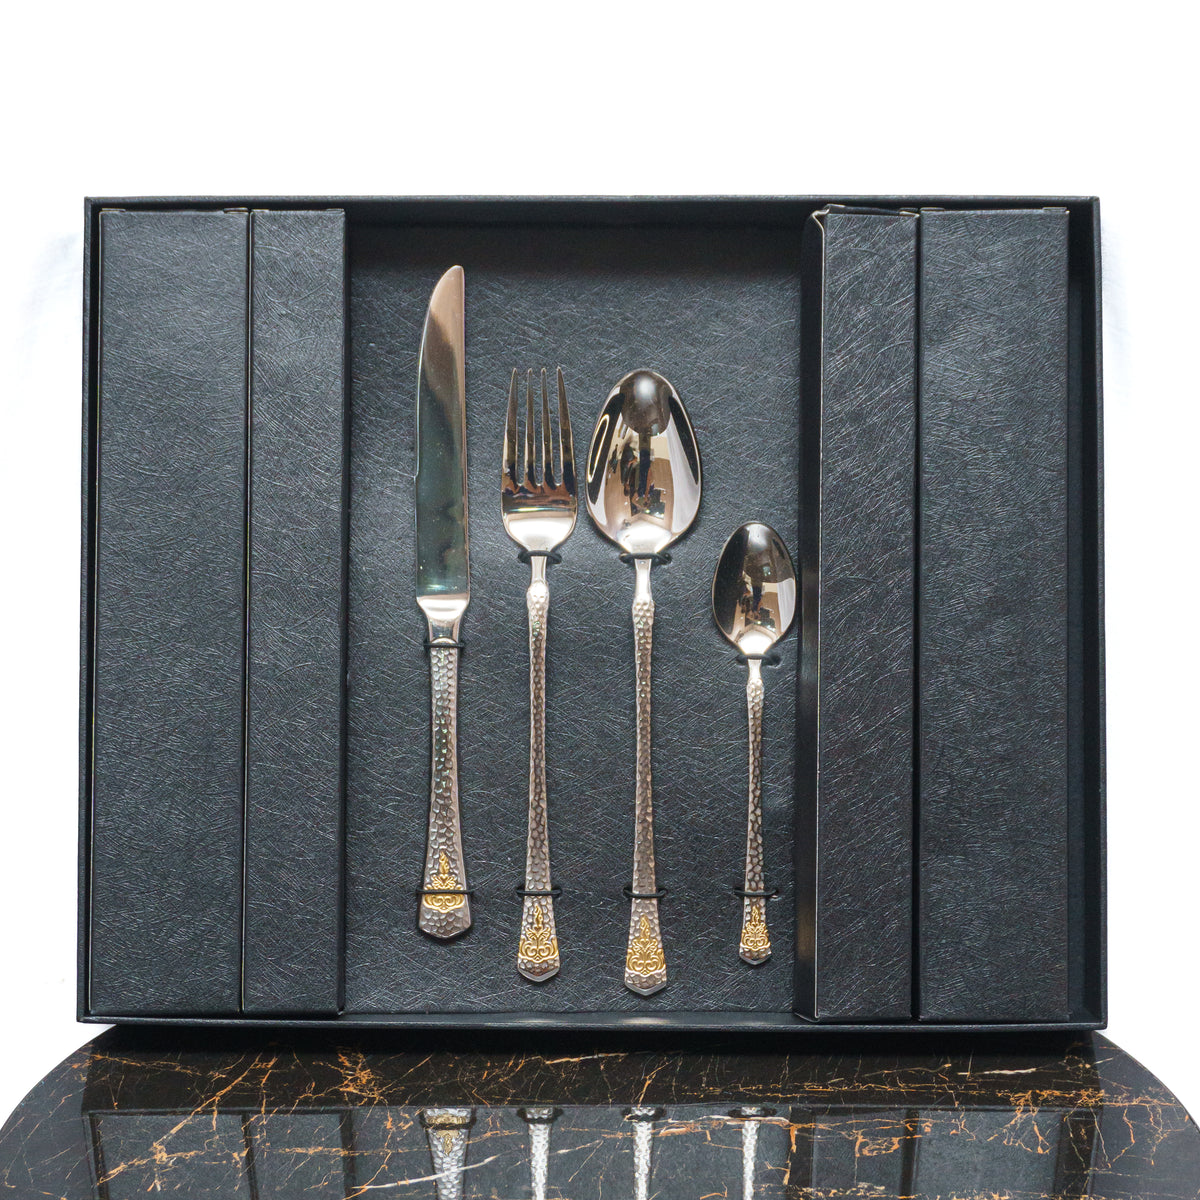 Western Elegance: Complete Cutlery Set in Classic Style 24 PCS